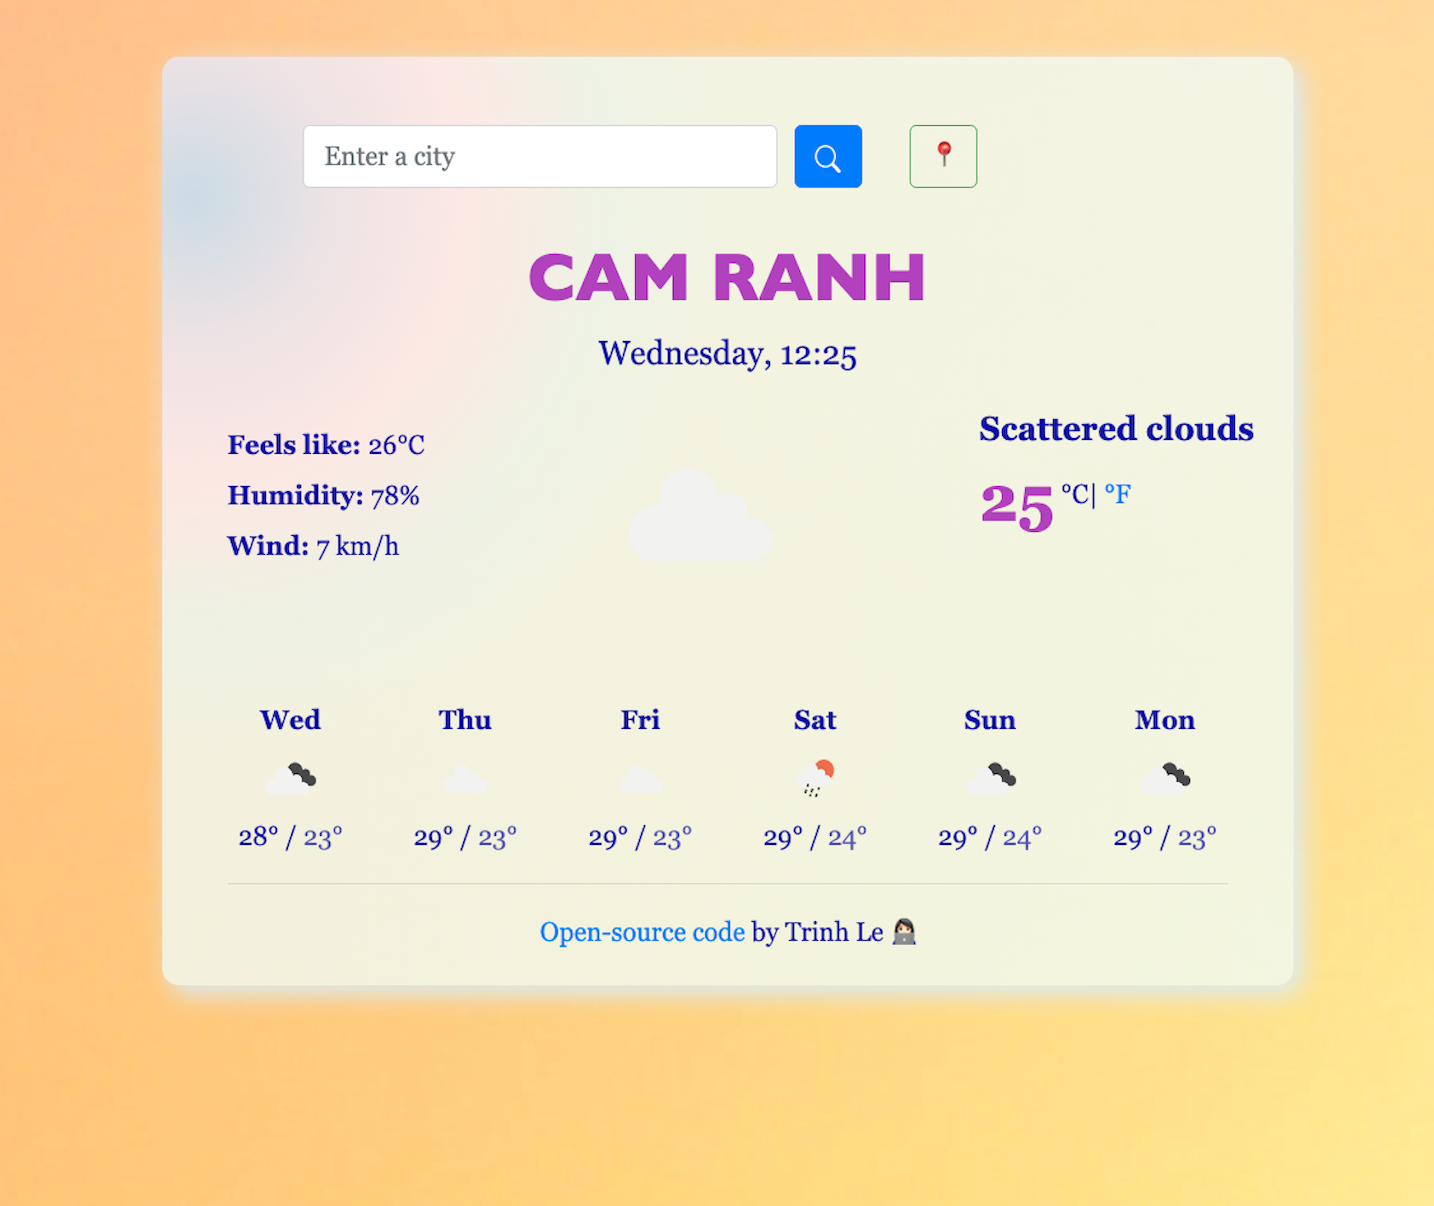 Weather app project